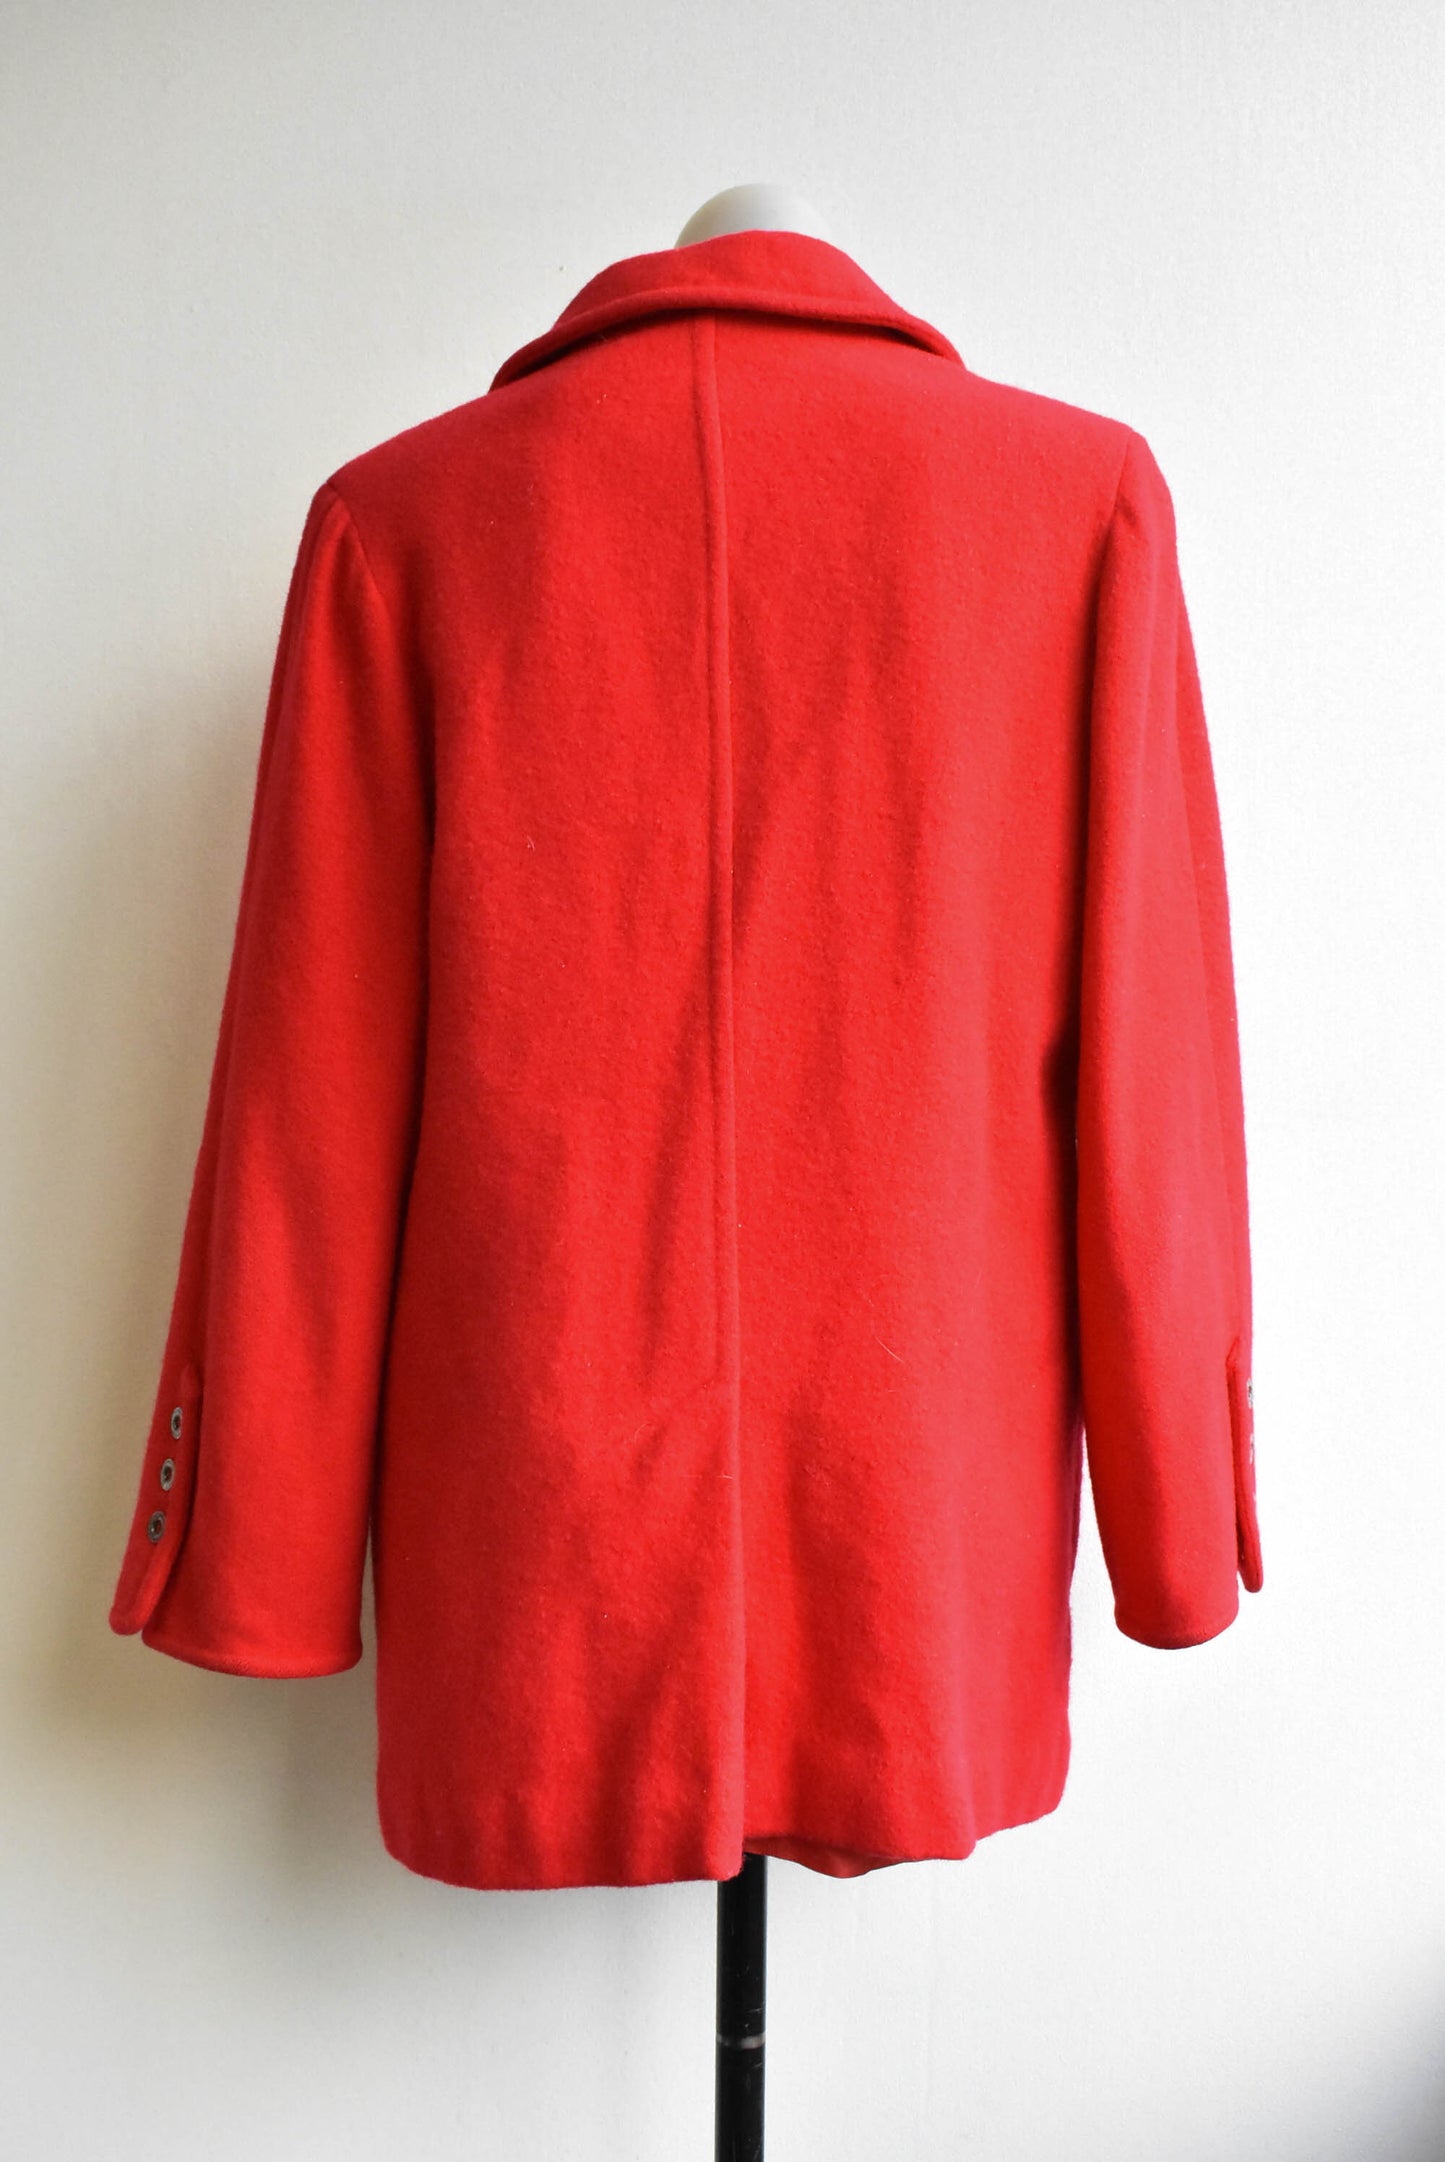 Nalla double breasted wool coat, size 16